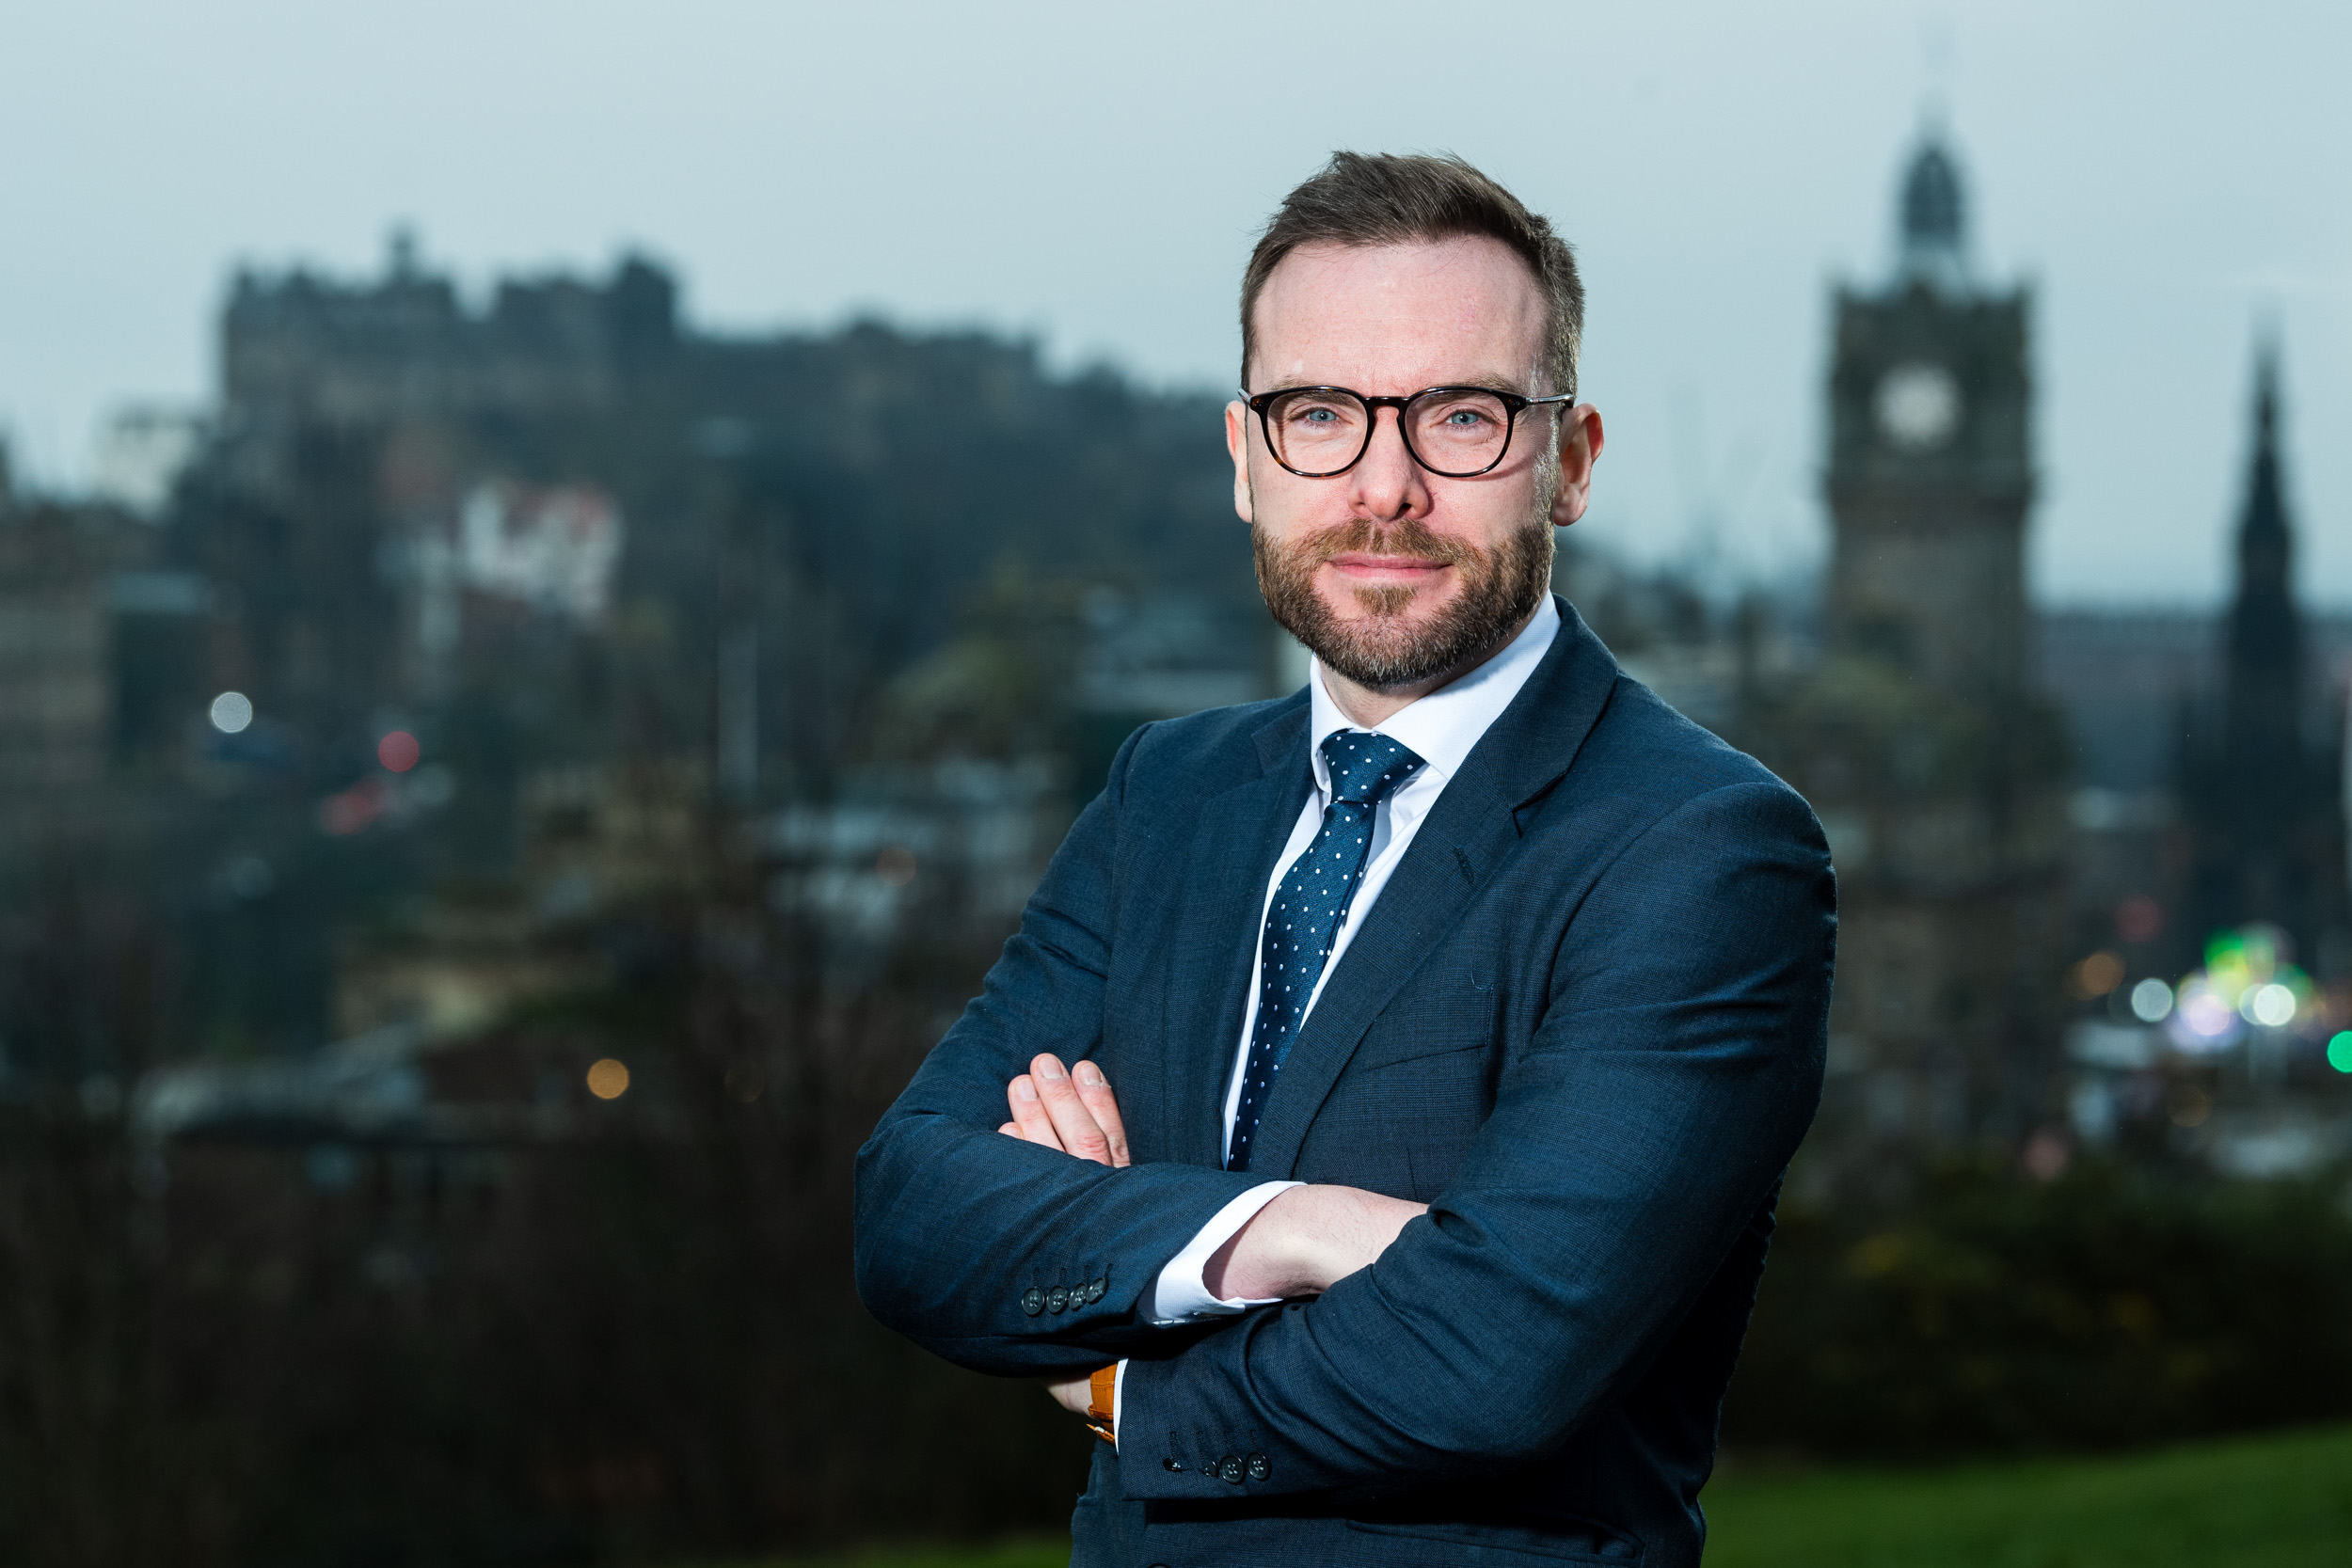 Moray Group launches Moray Financial with senior managing director appointment